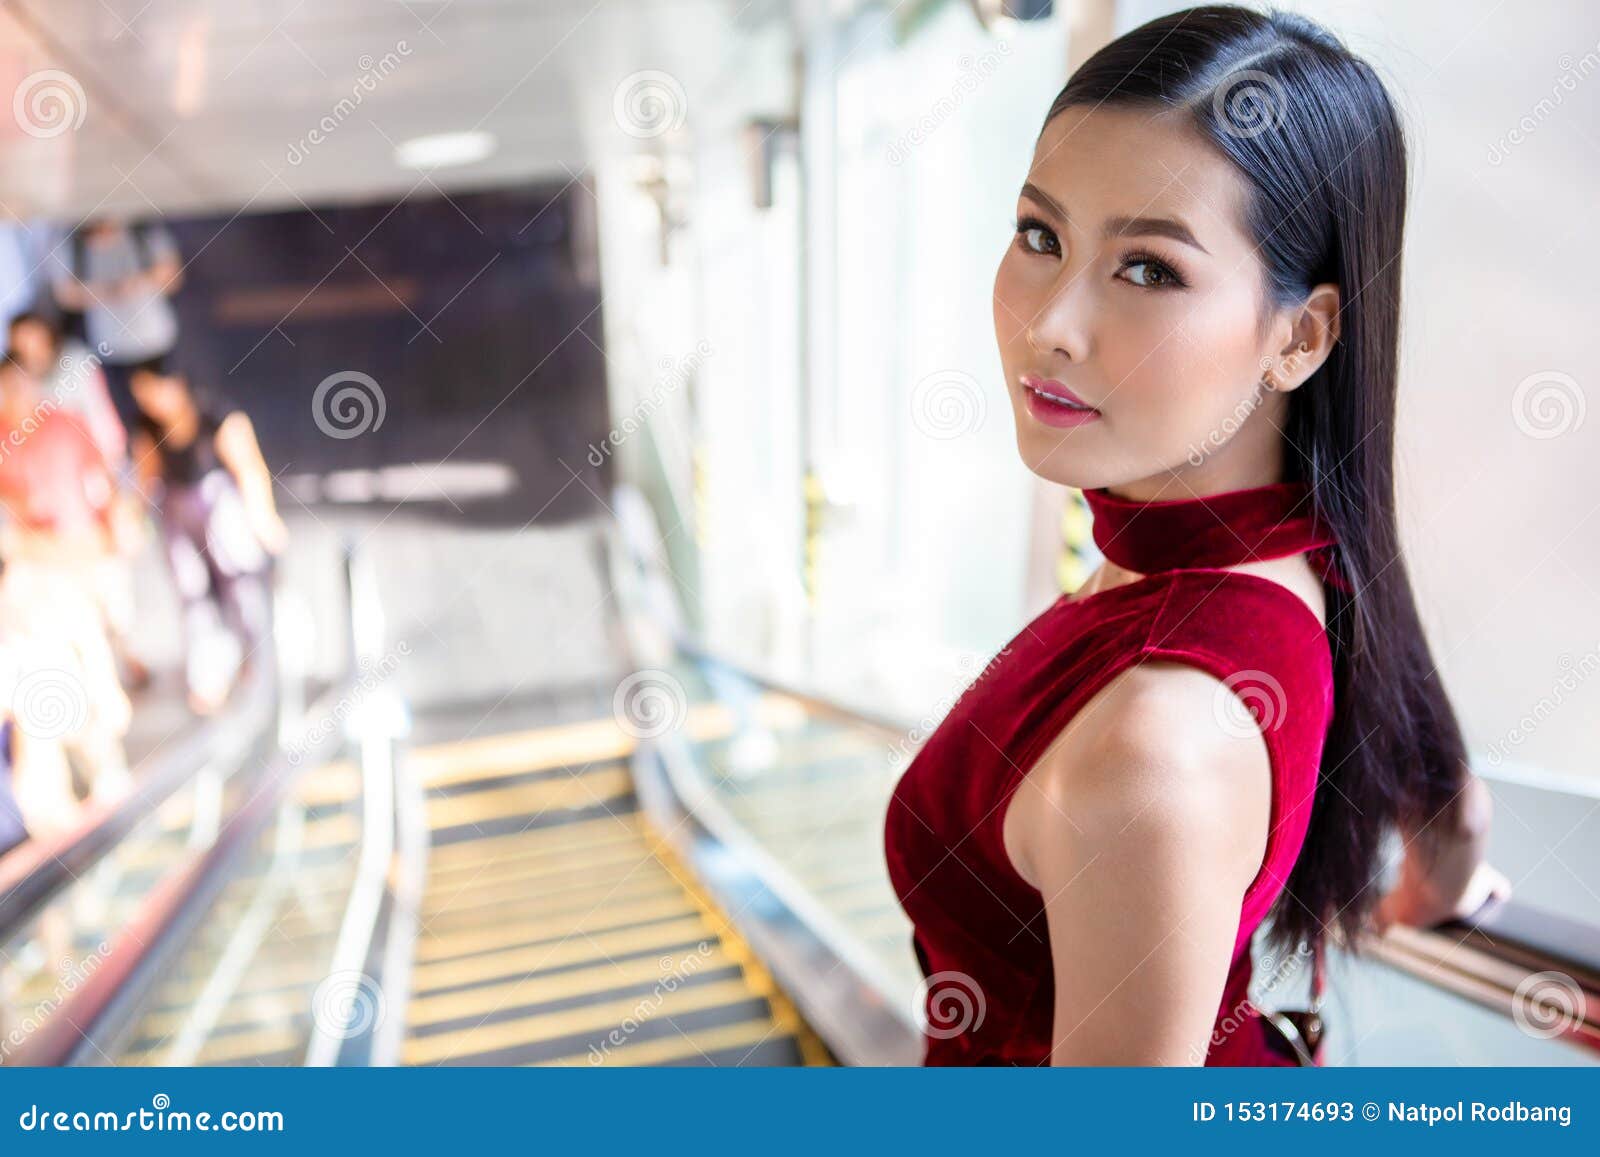 Beautiful Young Asian Woman In Red Dress Going Down The Escalator In